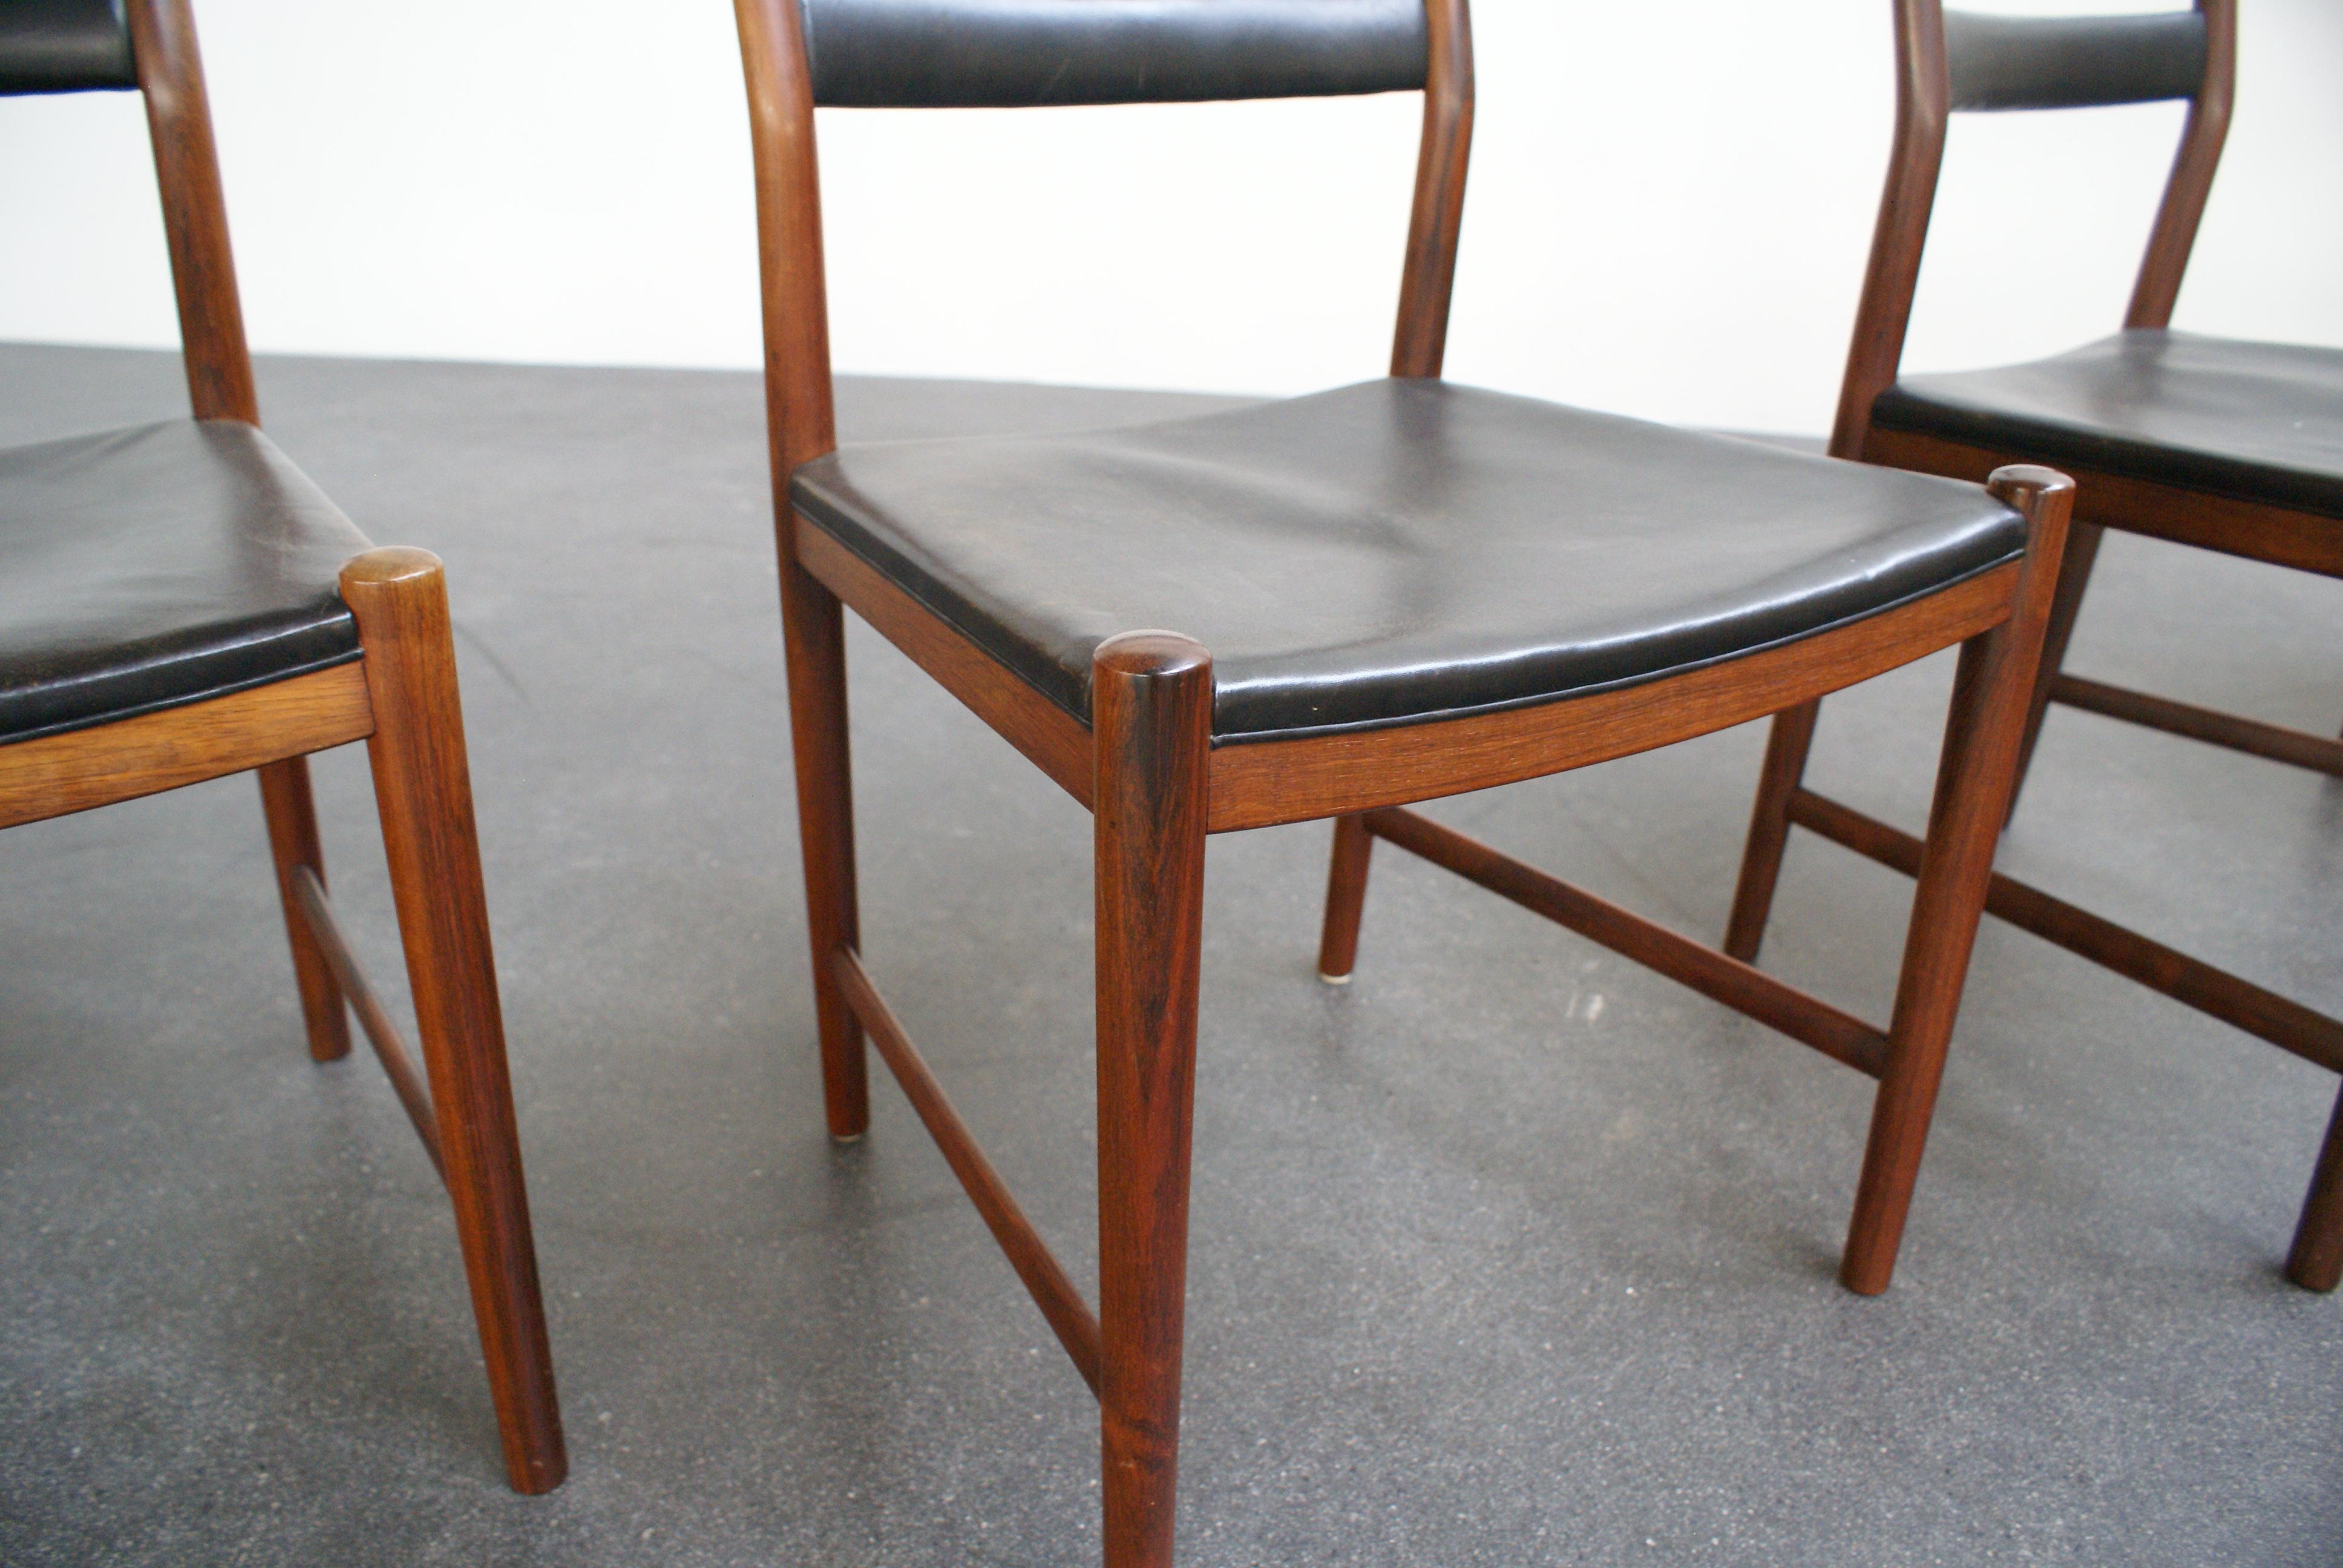 Mid-20th Century Helge Vestergaard-Jensen Set of Six Dining Chairs in Brazilian Rosewood, 1959 For Sale